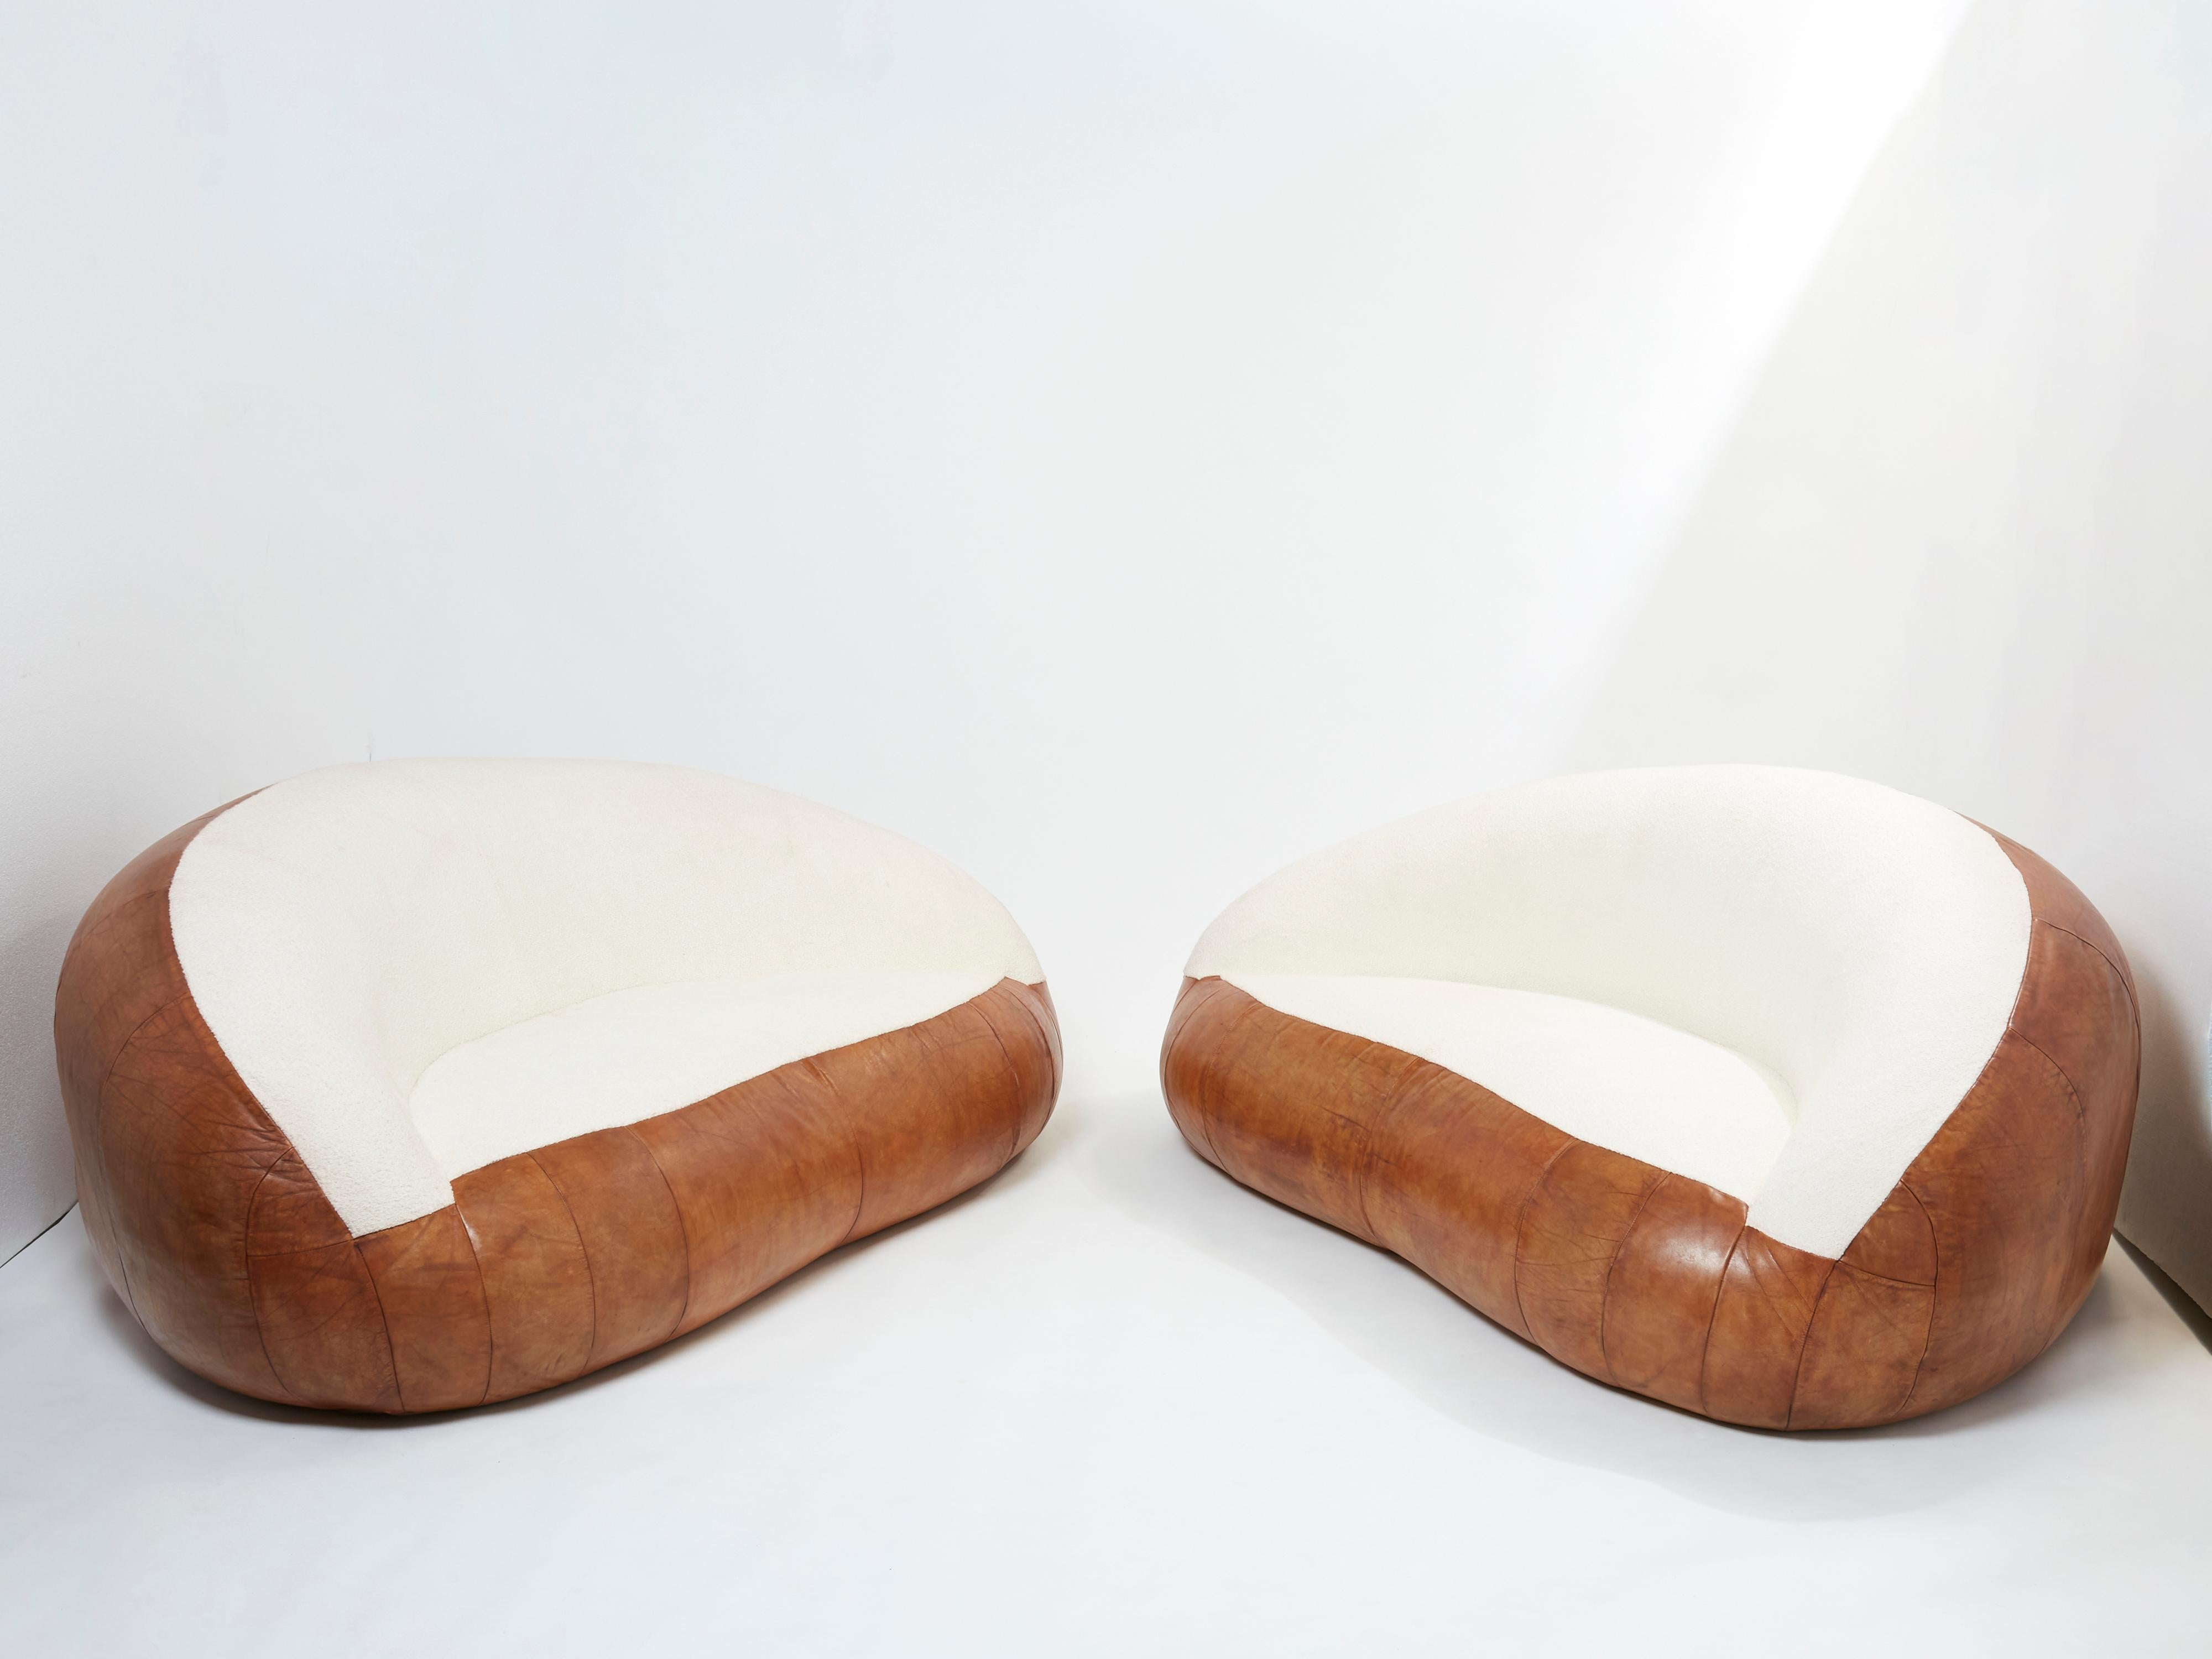 Rare set of two small croissant sofas by Raphaël Raffel for Maison Honoré Paris made in the mid 1970s. The sofas have been fully restored, keeping the original cognac leather, with the seat and seat back newly upholstered with a beautiful wool